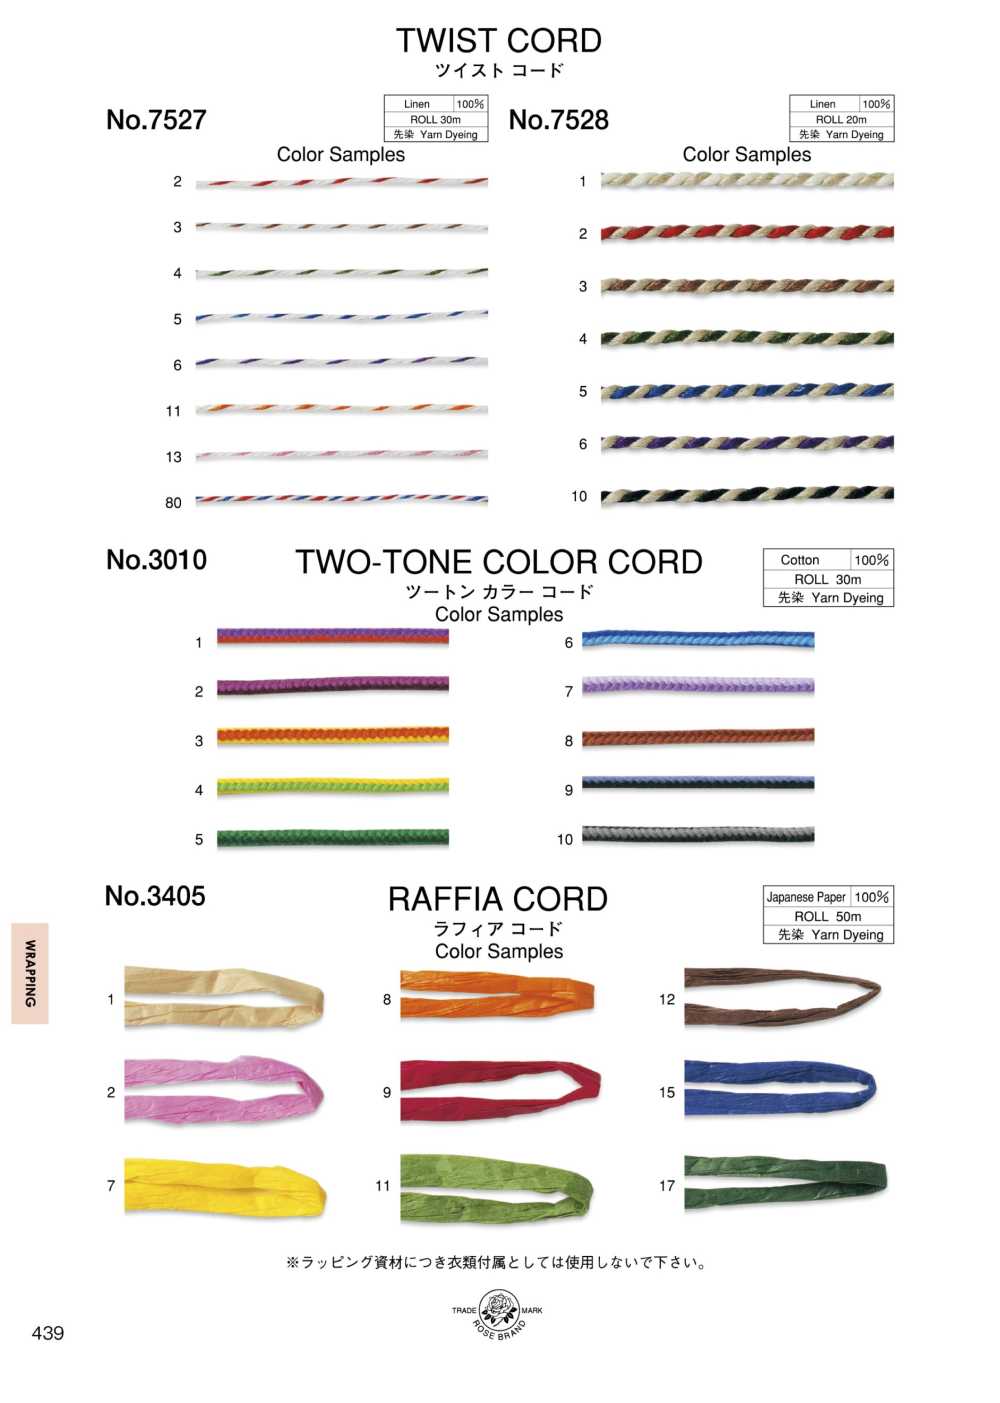 7527 Twisted Cord[Ribbon Tape Cord] ROSE BRAND (Marushin)